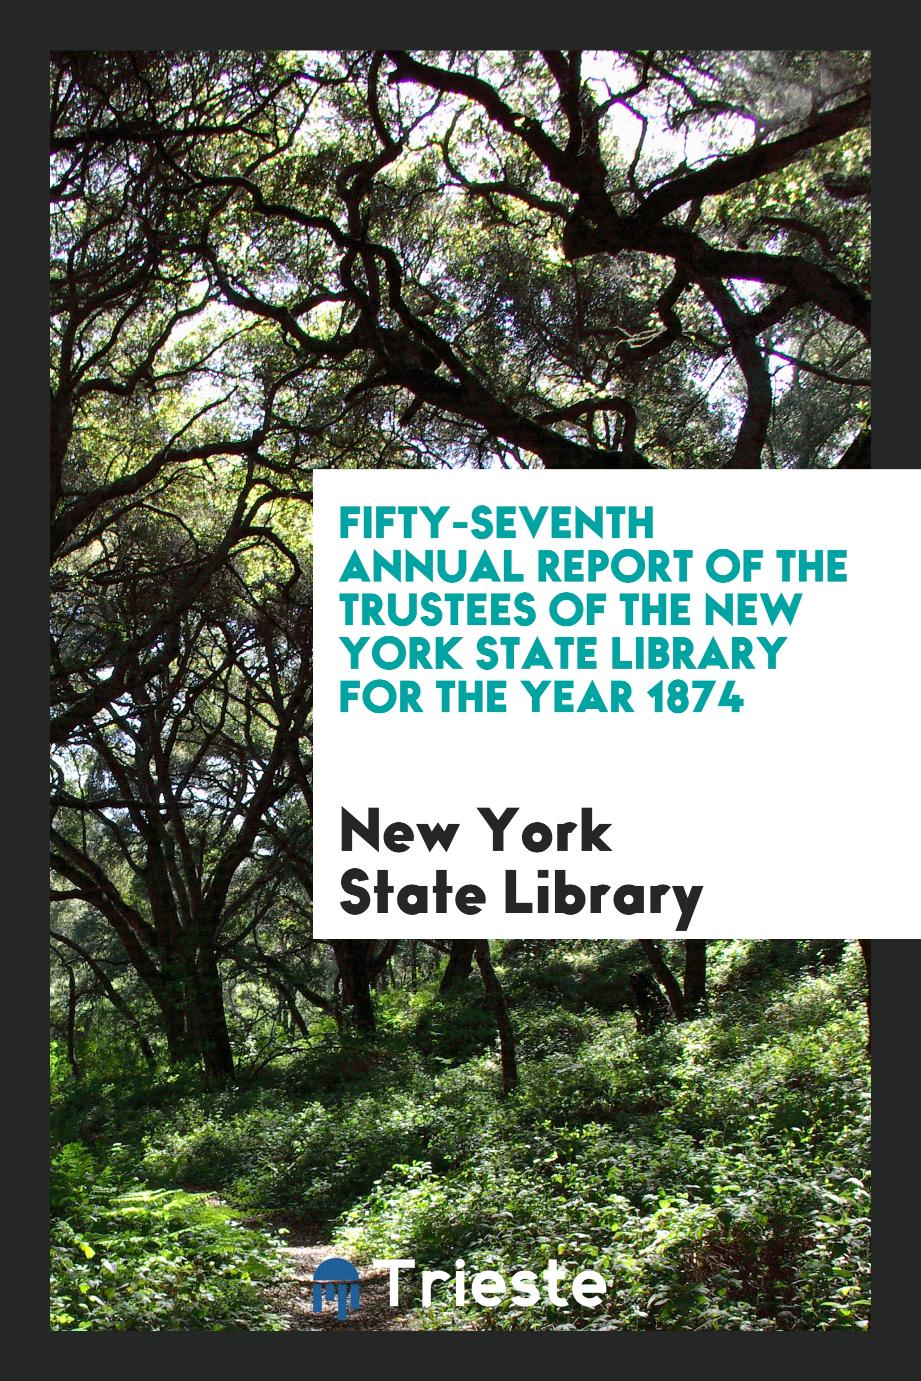 Fifty-Seventh Annual Report of the Trustees of the New York State Library for the Year 1874